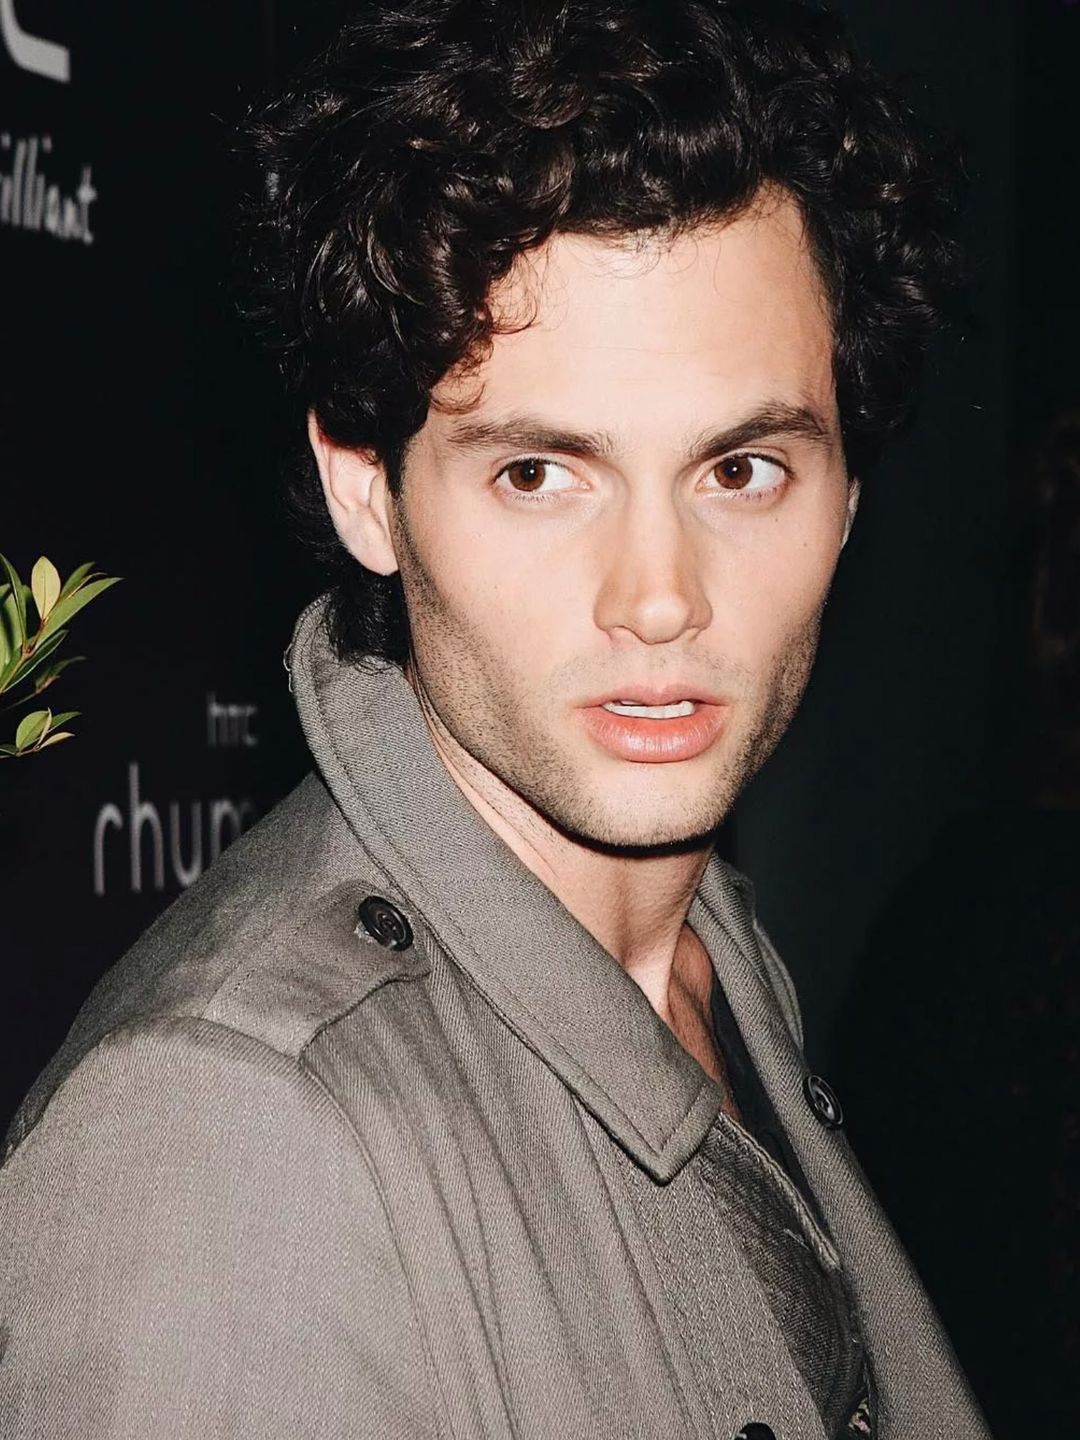 Penn Badgley who are his parents